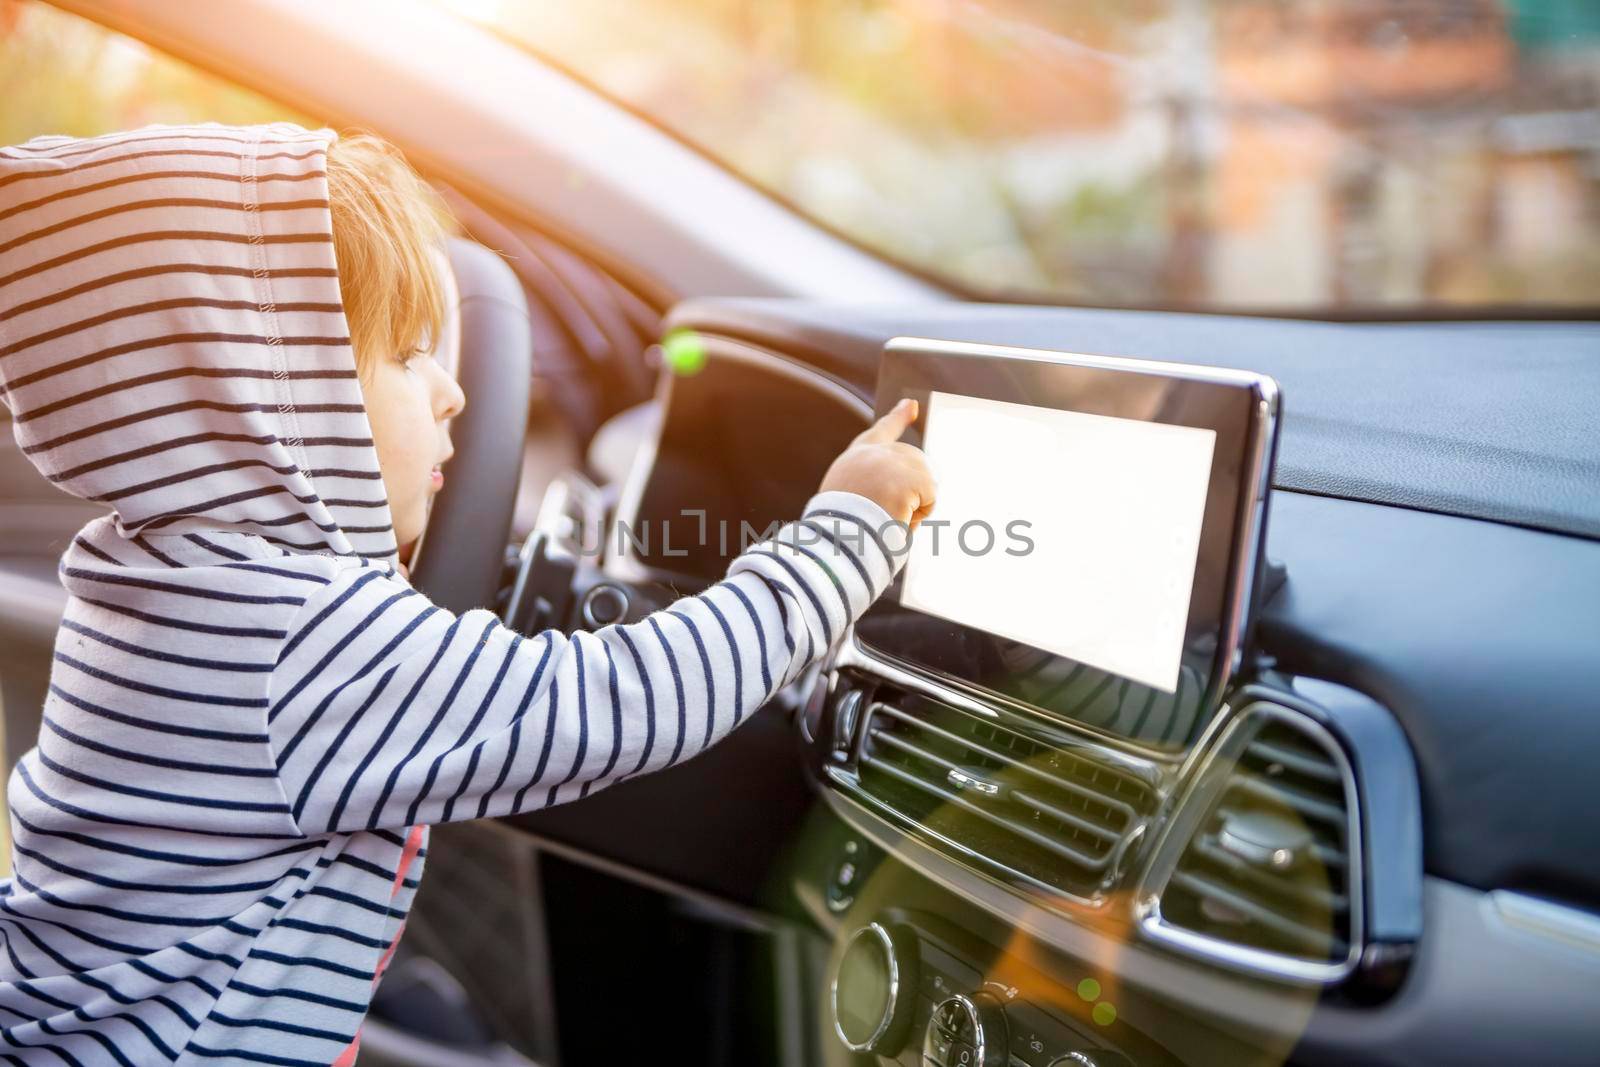 curious toddler girl holding, touching, and turning a car mnultiedia touch screen player button. empty white screen